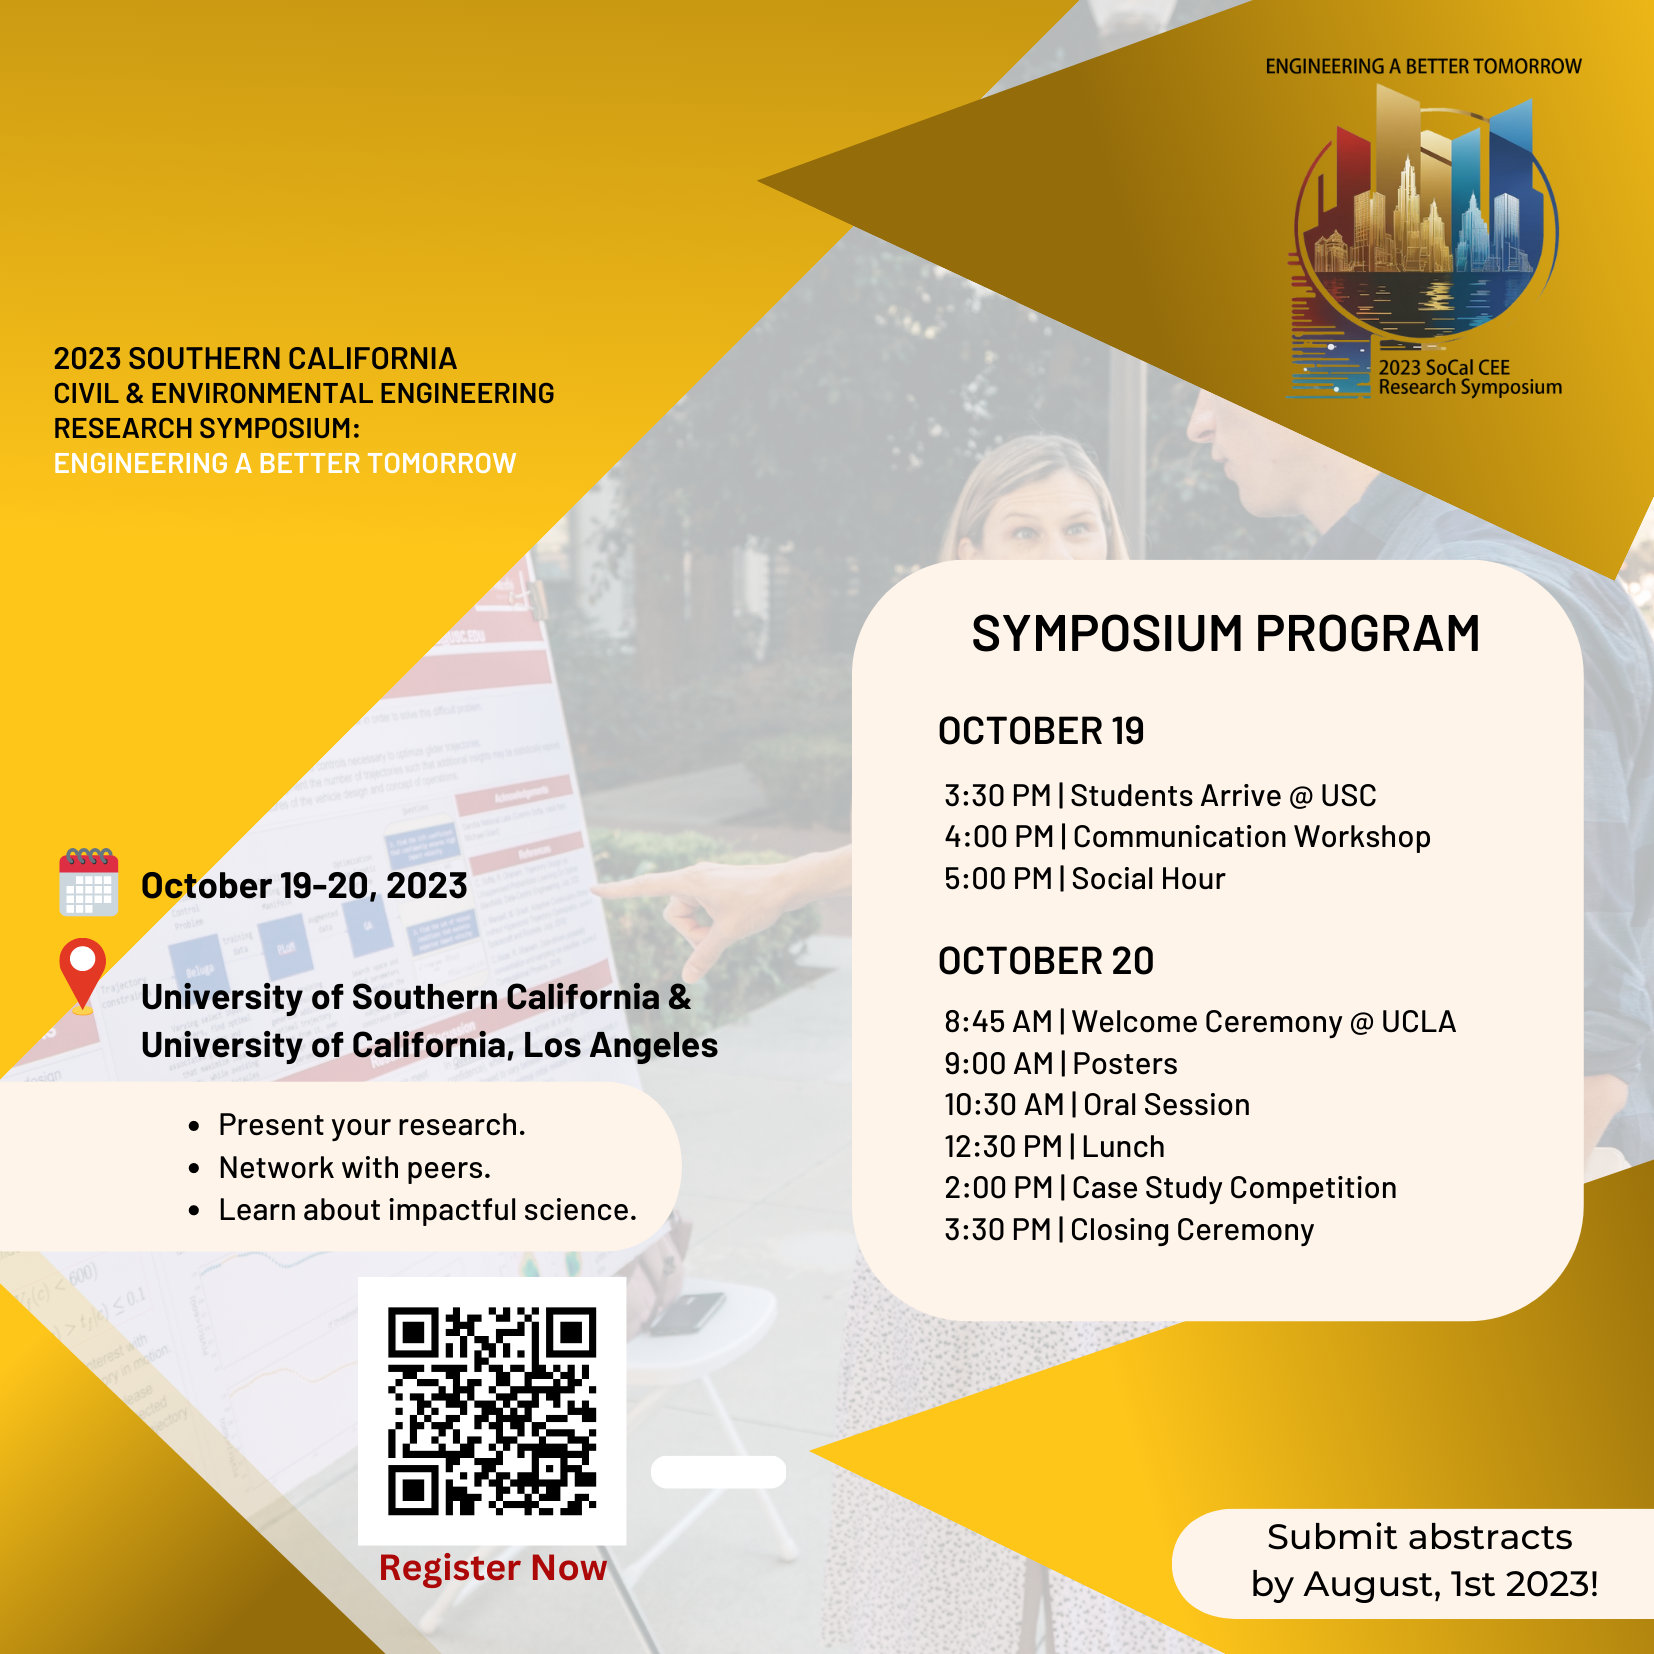 2023 SoCal Civil and Environmental Engineering Research Symposium (CEERS)